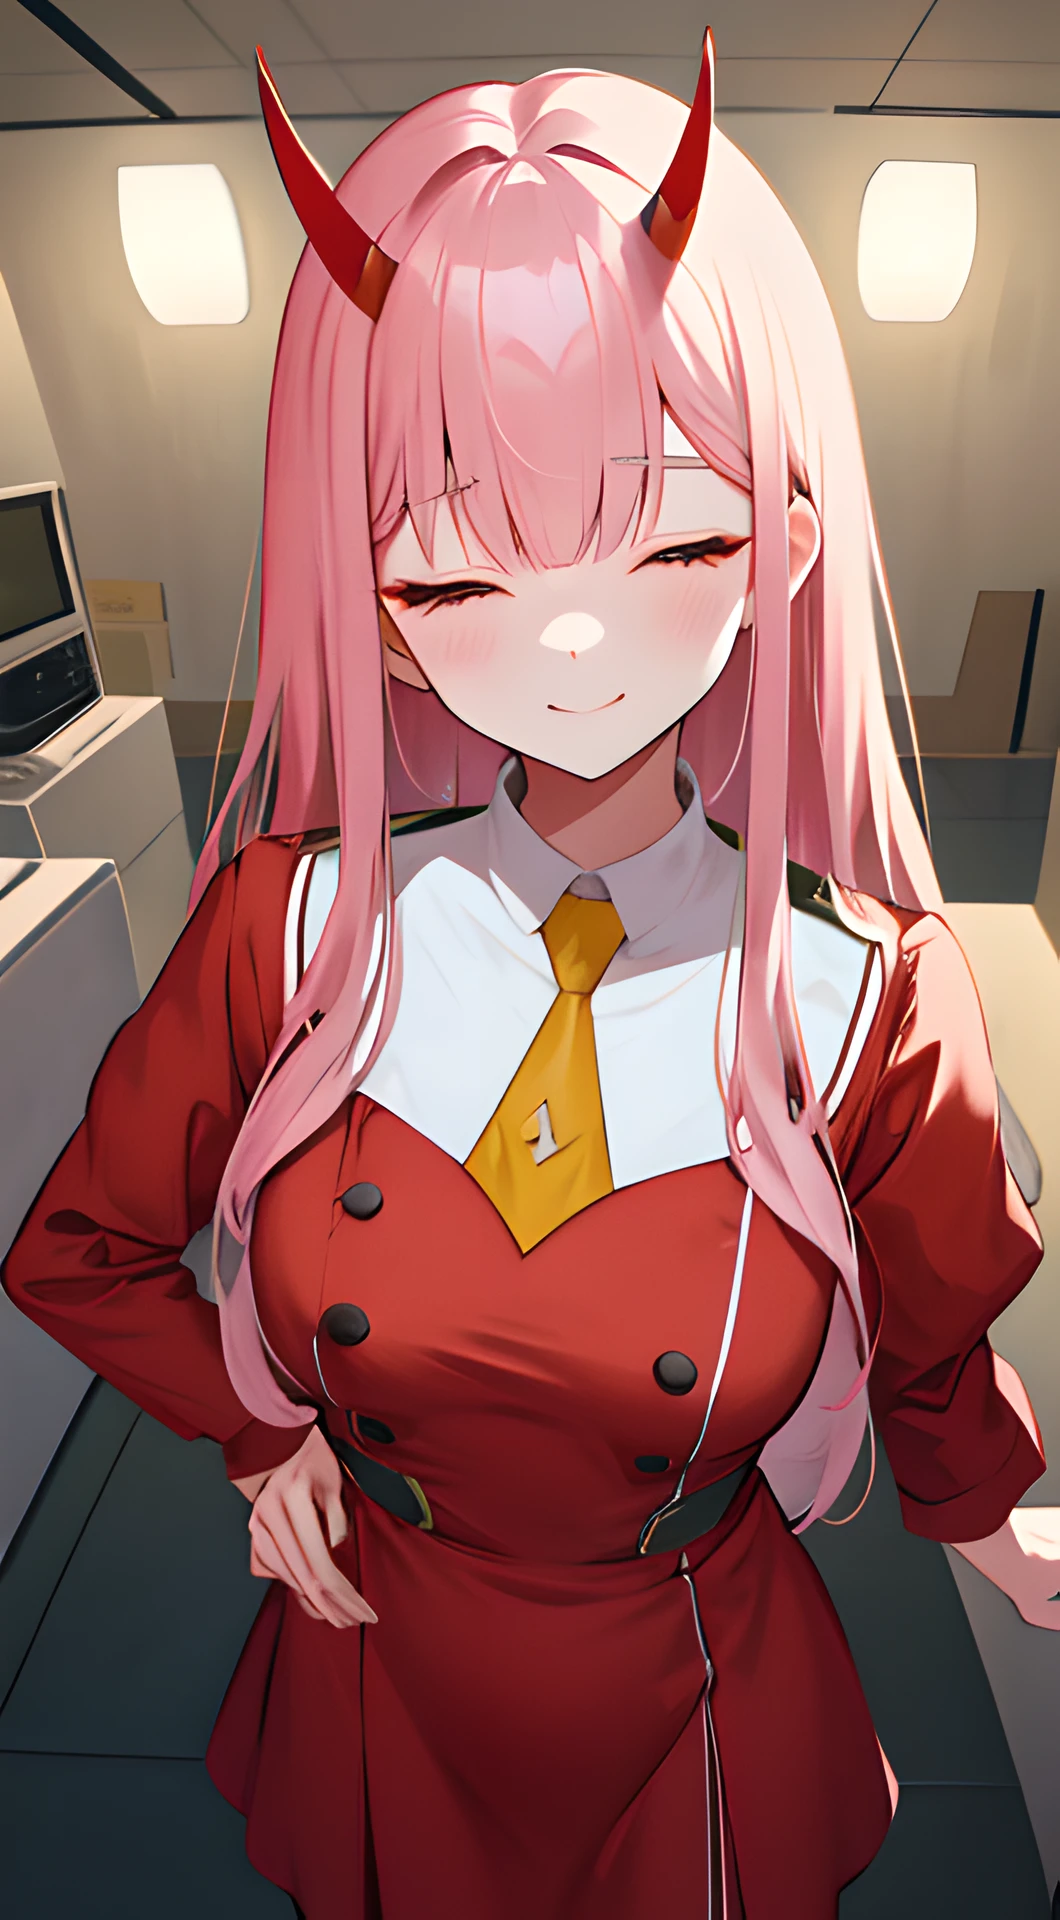 Zerotwo\（Dear in Franks\）， Dear in Franks， 1girll， By bangs， nip， shadowing， long whitr hair， little breast， upper legs， putting makeup on， Red dress with details， a yellow tie， lacepantyhose， closing her eyes， smiling at viewer， pair of small red horns， Pink hair， Red Eyeshadow， Tighten the skin， solo，wink